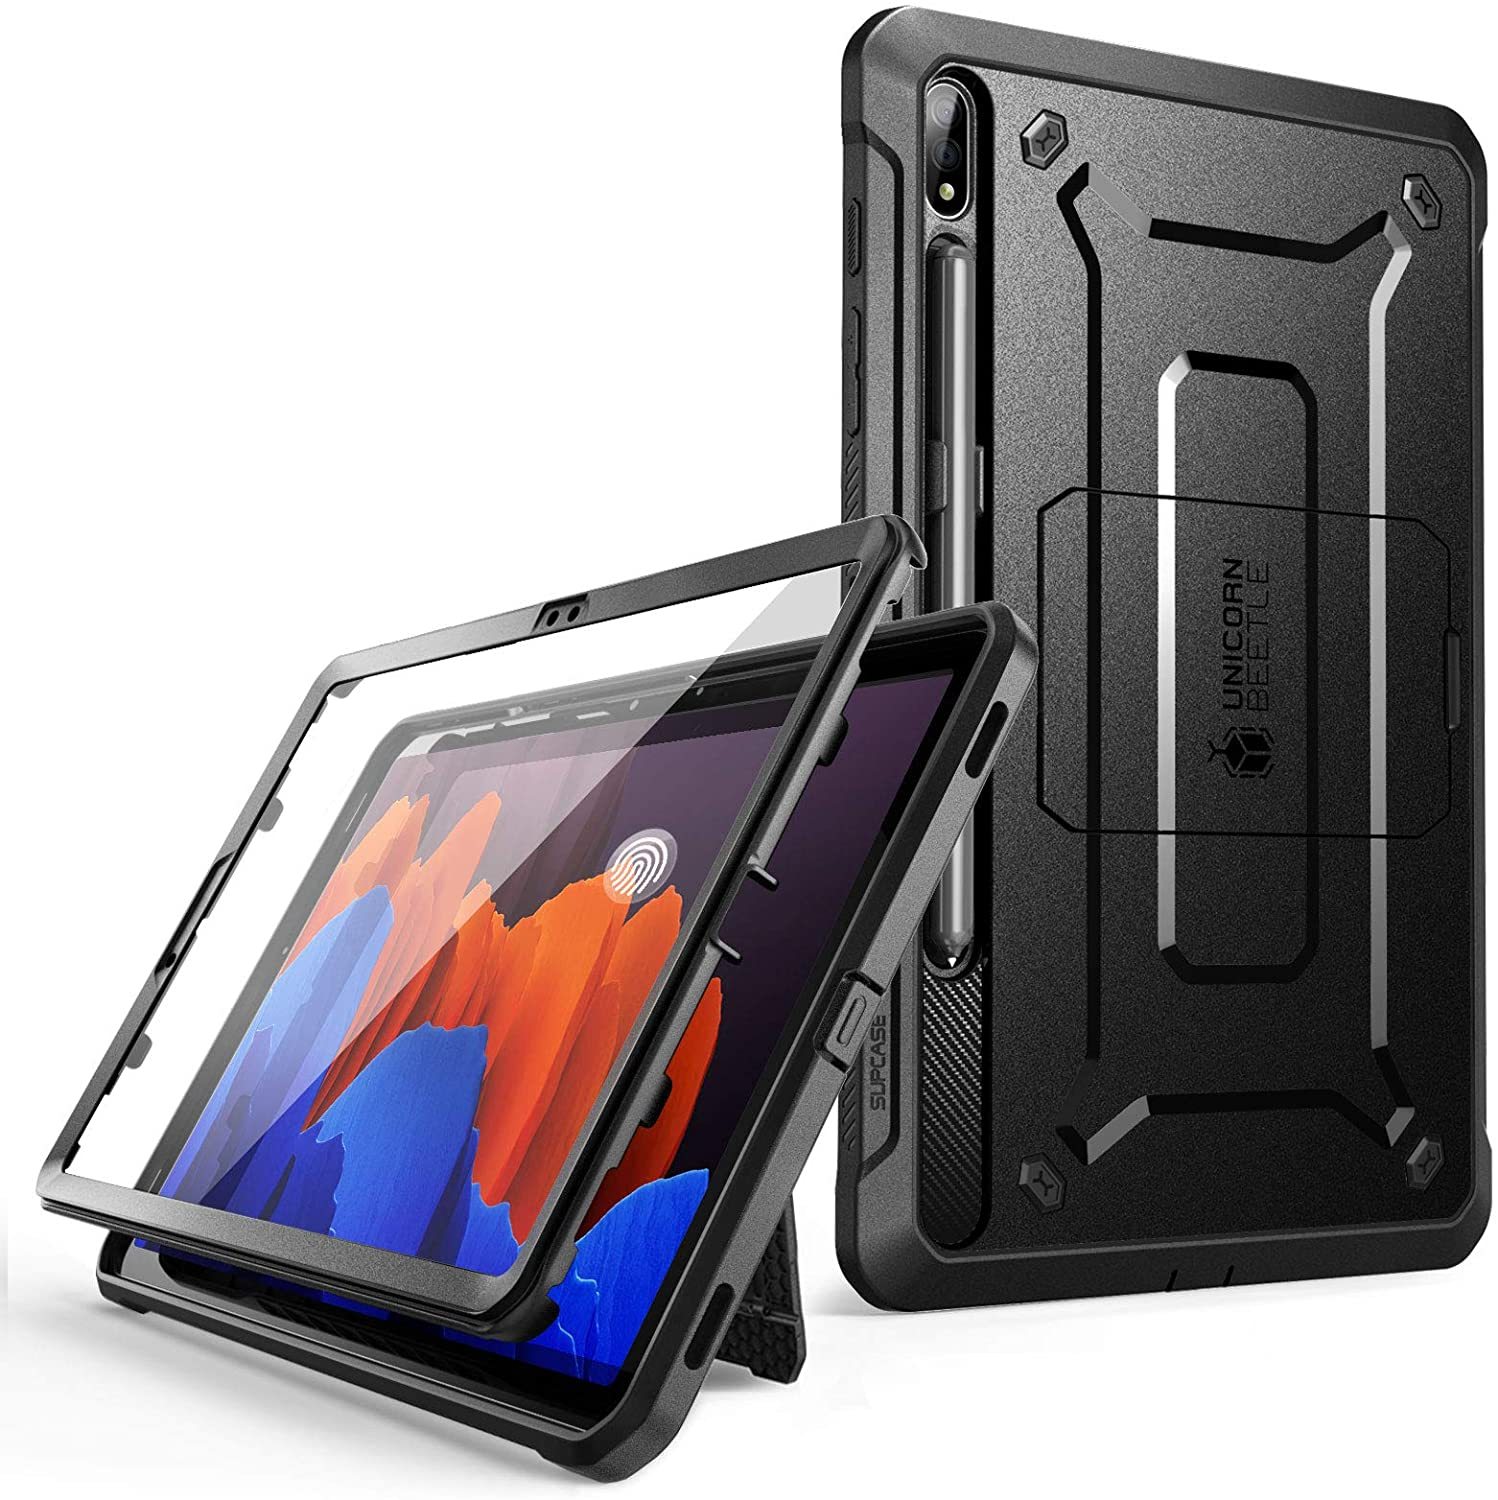 Primary image for Galaxy Tab S7 Plus 12.4 inch (2020) Unicorn Beetle Pro Rugged Case